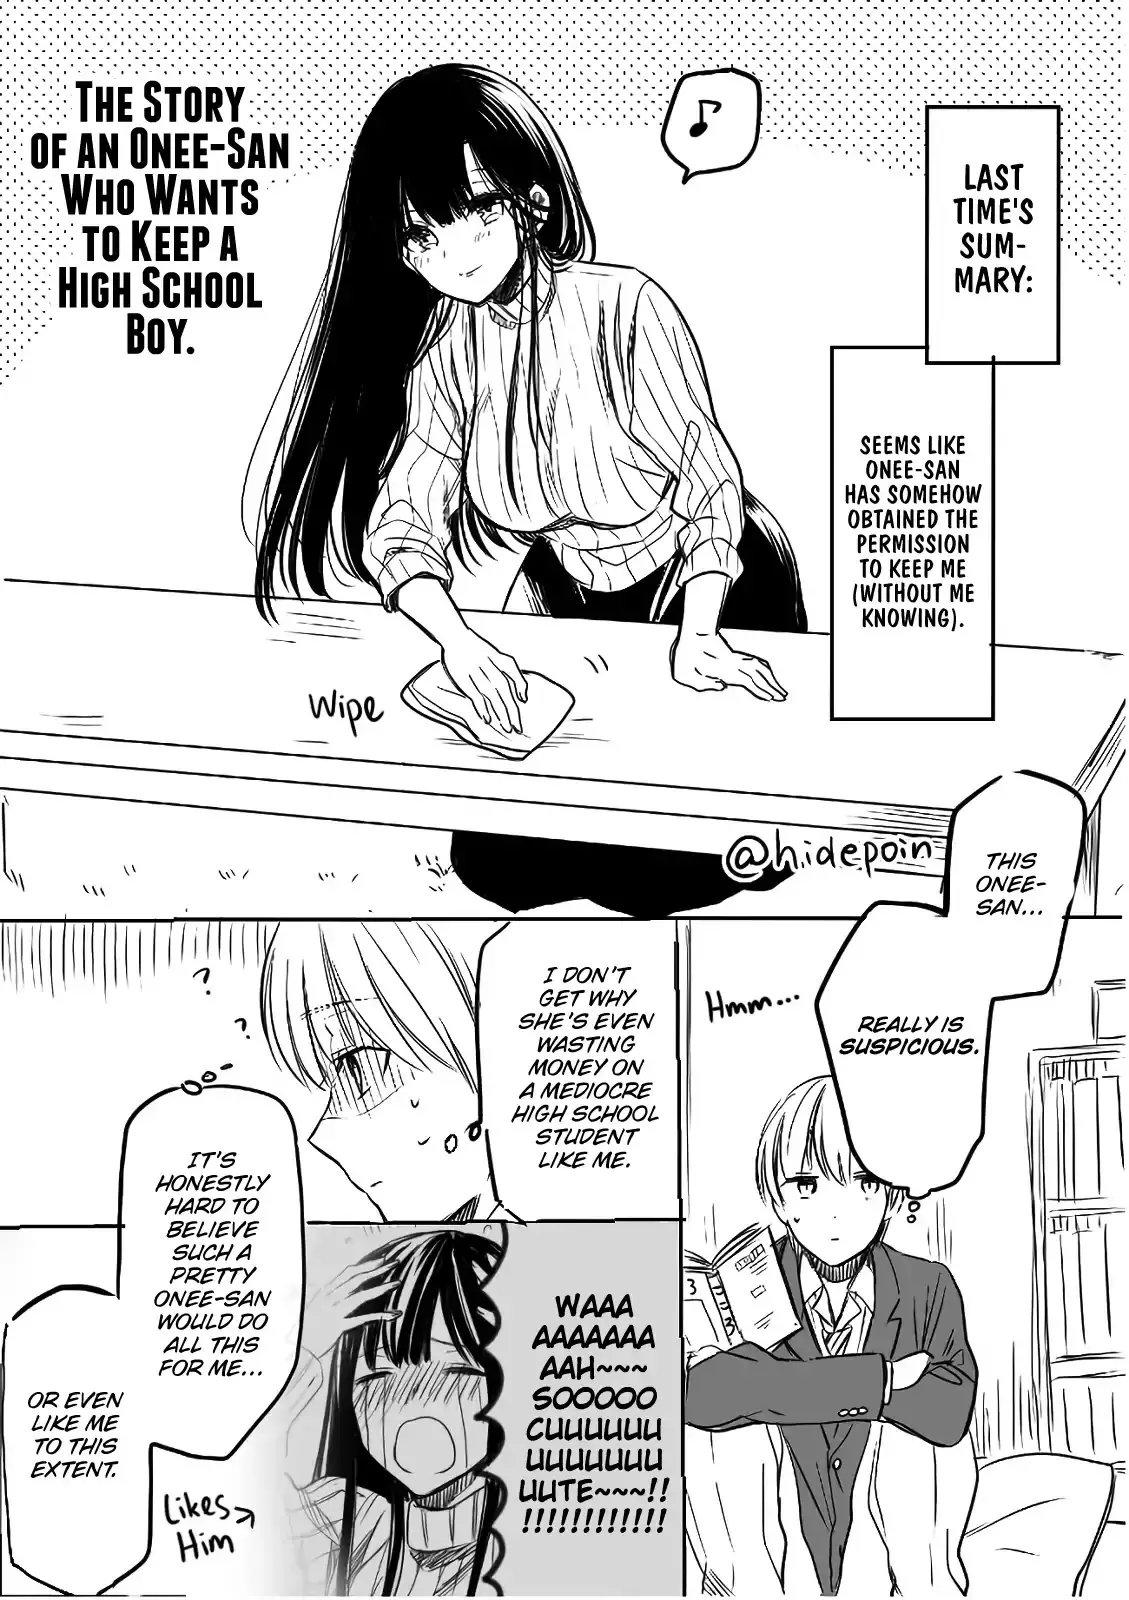 The Story Of An Onee-San Who Wants To Keep A High School Boy - 5 page 1